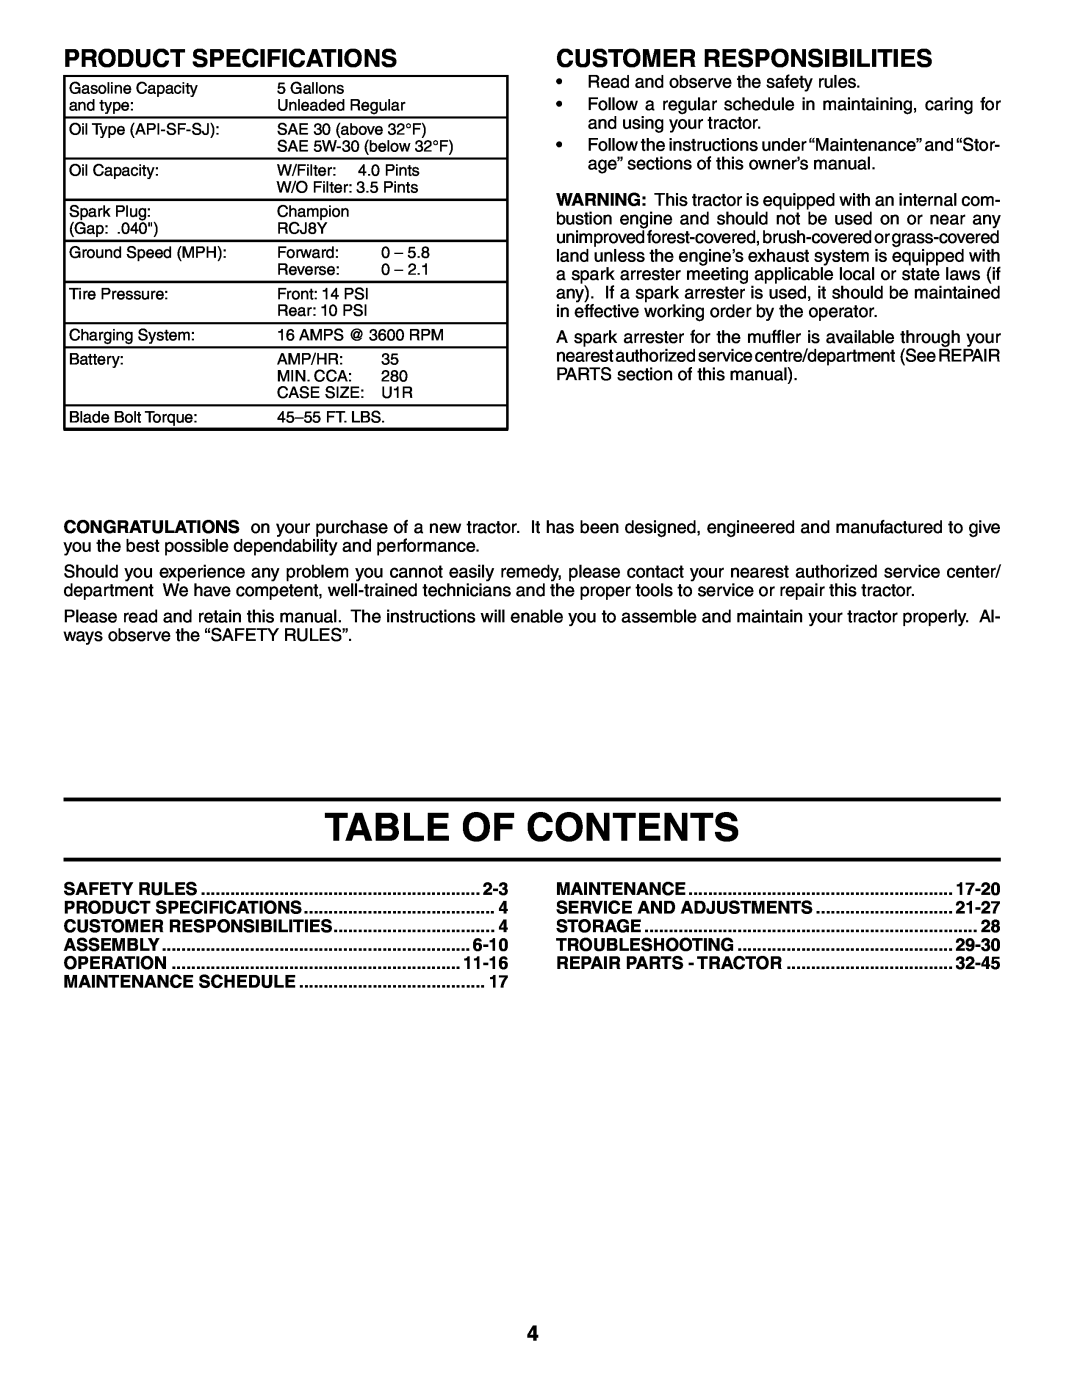 Husqvarna GTH2548XP owner manual Table Of Contents, Product Specifications, Customer Responsibilities 